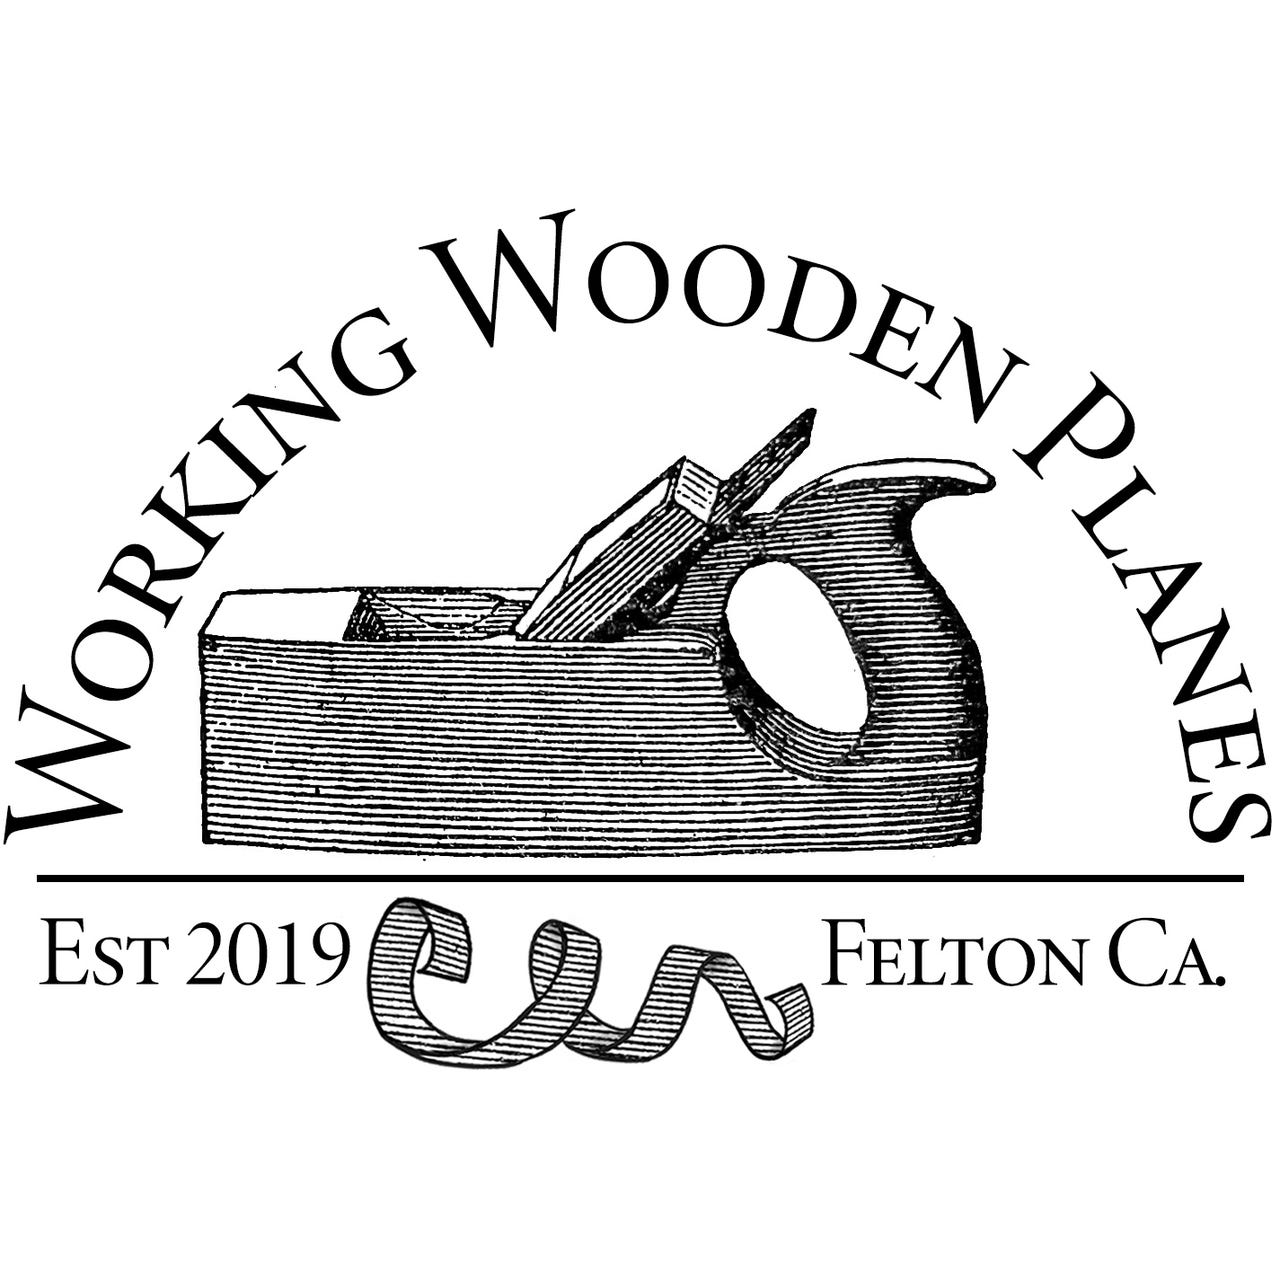 Artwork for Working Wooden Planes